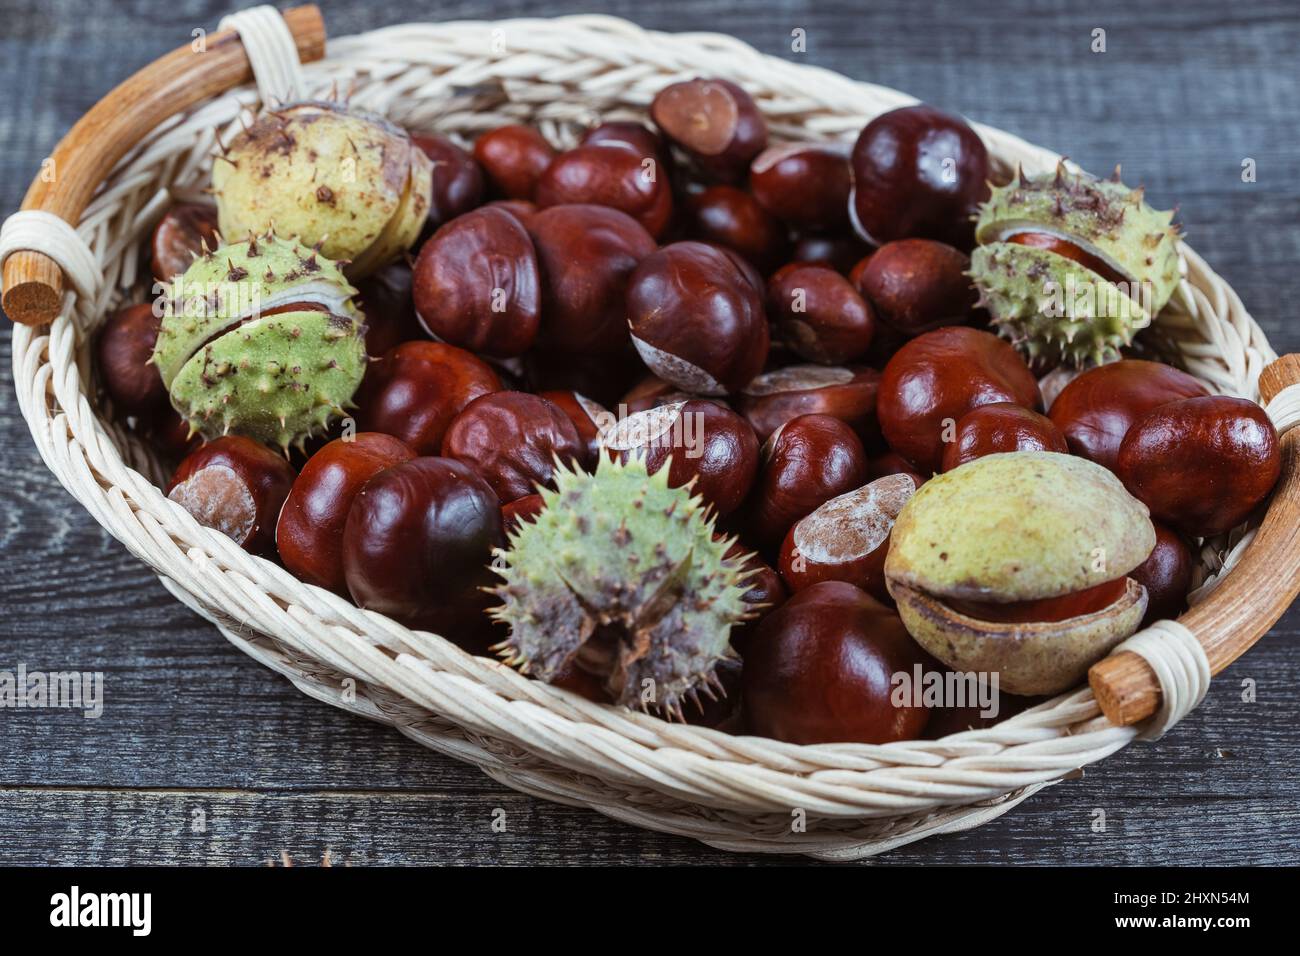 Close up view of Chestnuts in a basket on a wooden background Stock Photo